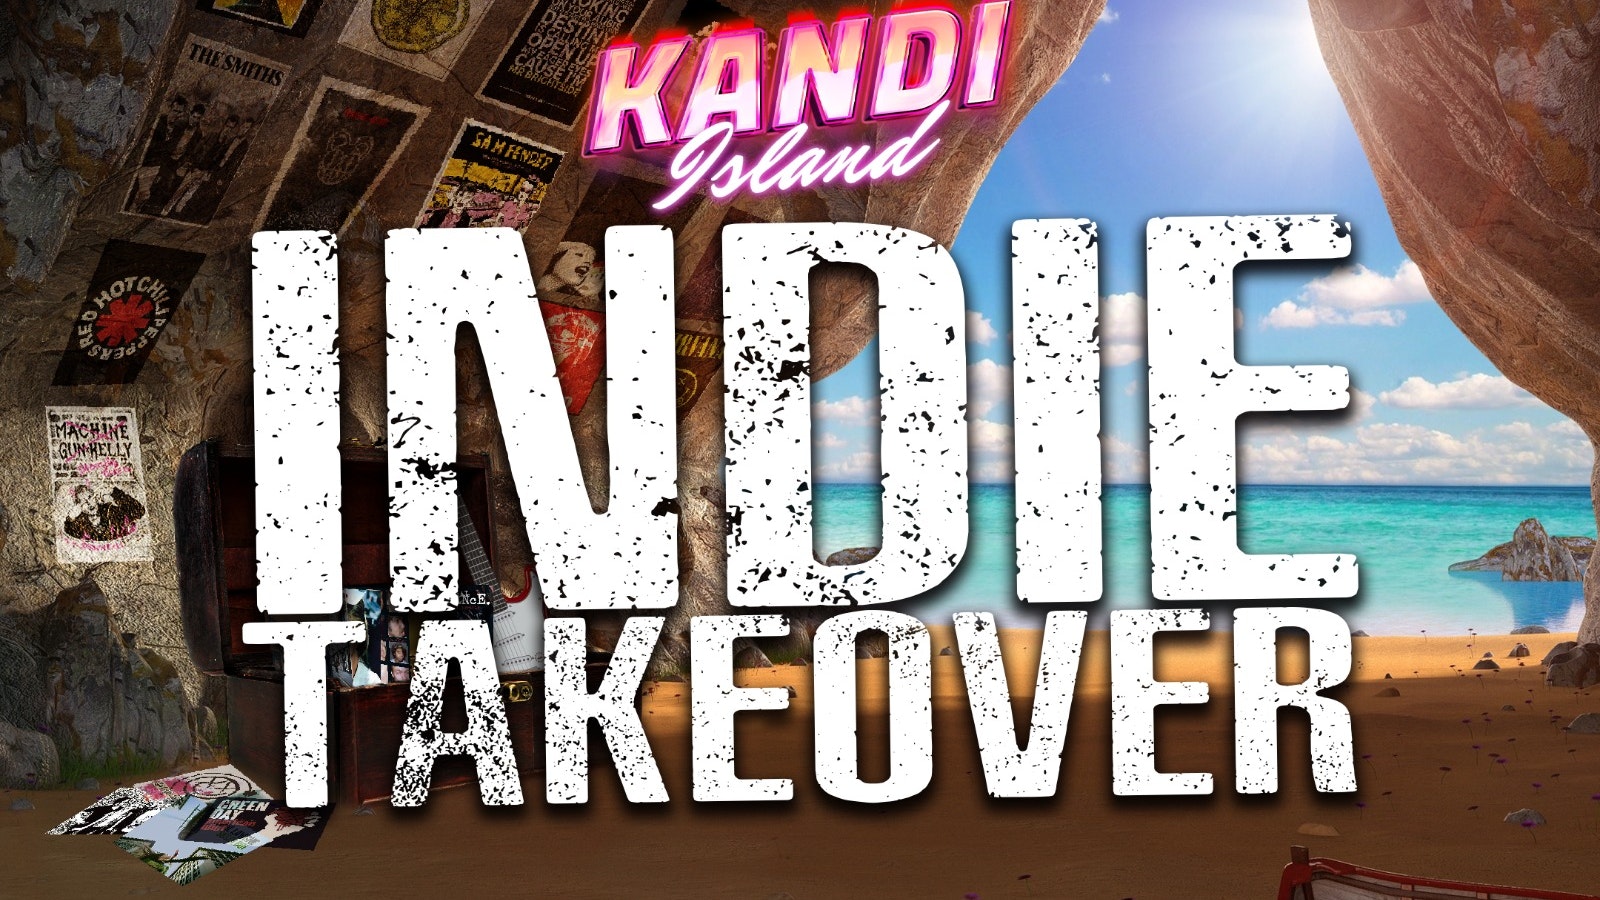 KANDI ISLAND | INDIE TAKEOVER SPECIAL! | £1 SHOTS & £1 TICKETS!  | DIGITAL | 13th FEBRUARY